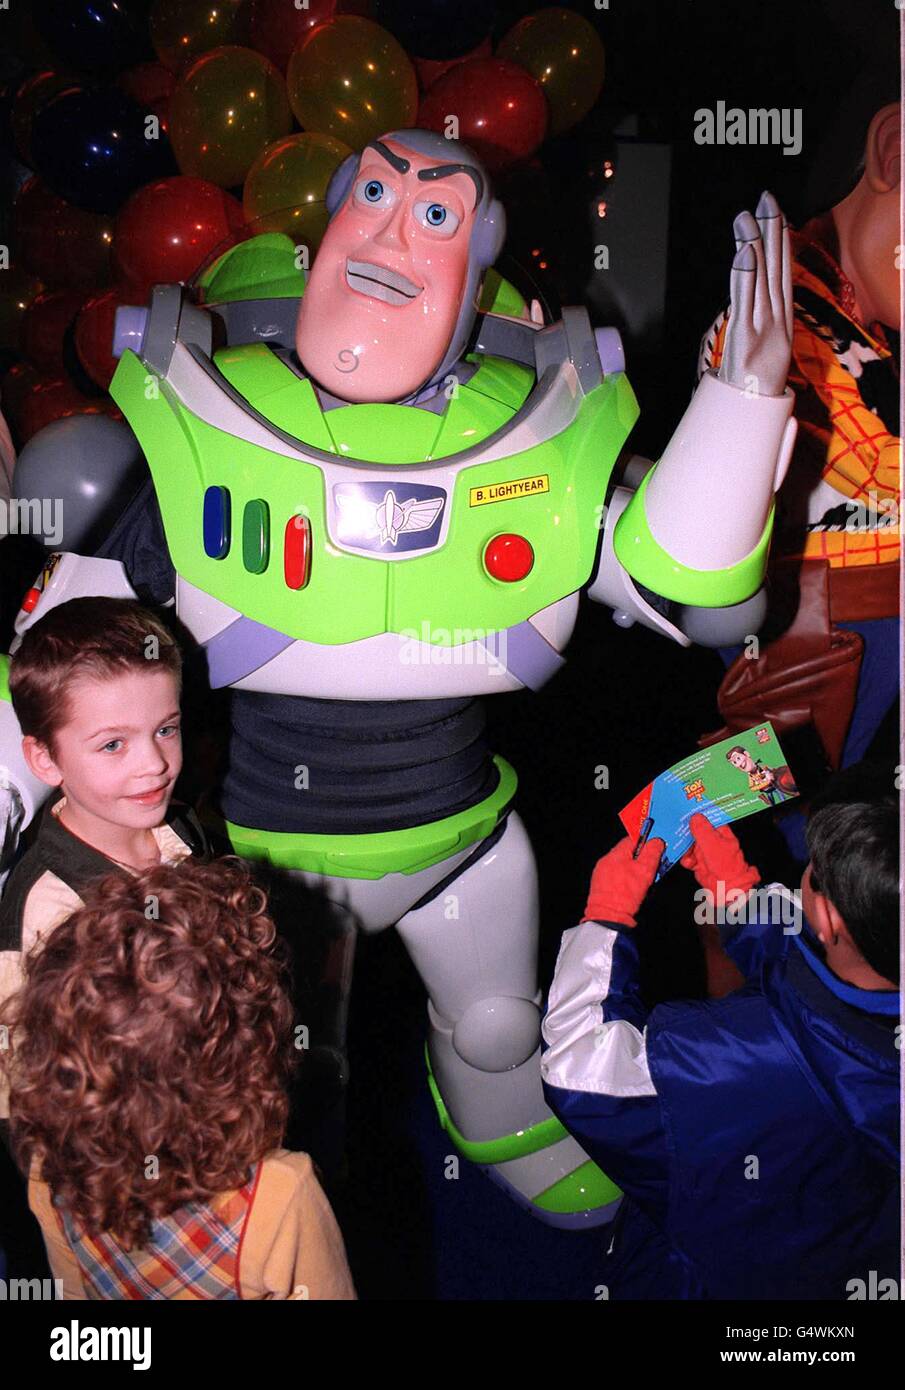 Toy Story's 'Buzz Lightyear' greets young fans at the British film premiere of Toy Story 2 at the Warner Village Cinema in Finchley, London. Stock Photo